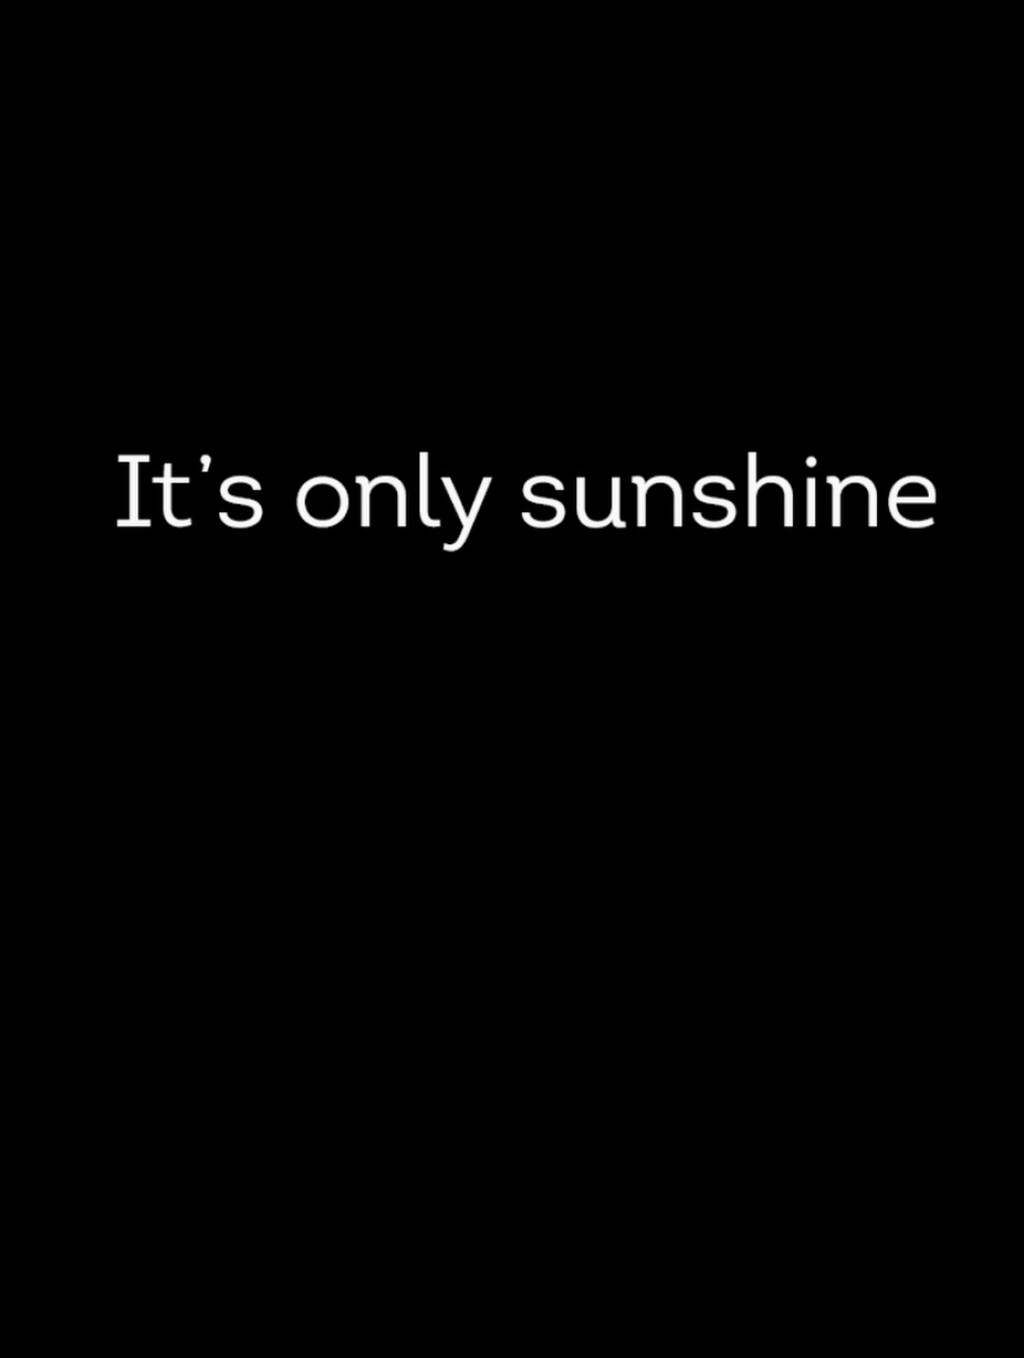 Filmposter for It's only sunshine